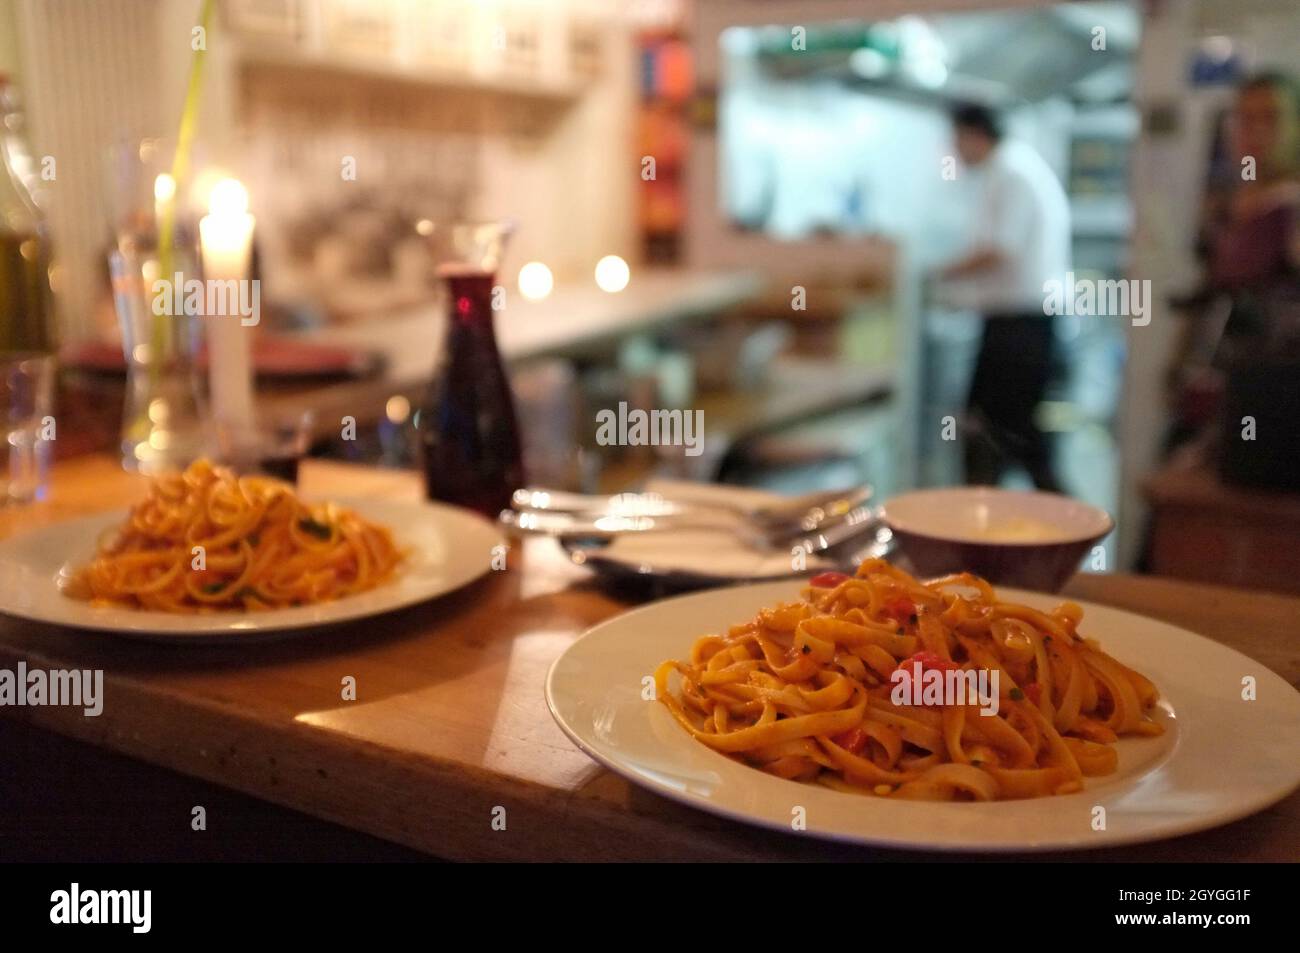 GERMANY, BERLIN, PRENZLAUER BERG, SCHWEDTER STRASSE, DONATH OSTERIA, PASTA DISHES ON A COUNTER Stock Photo